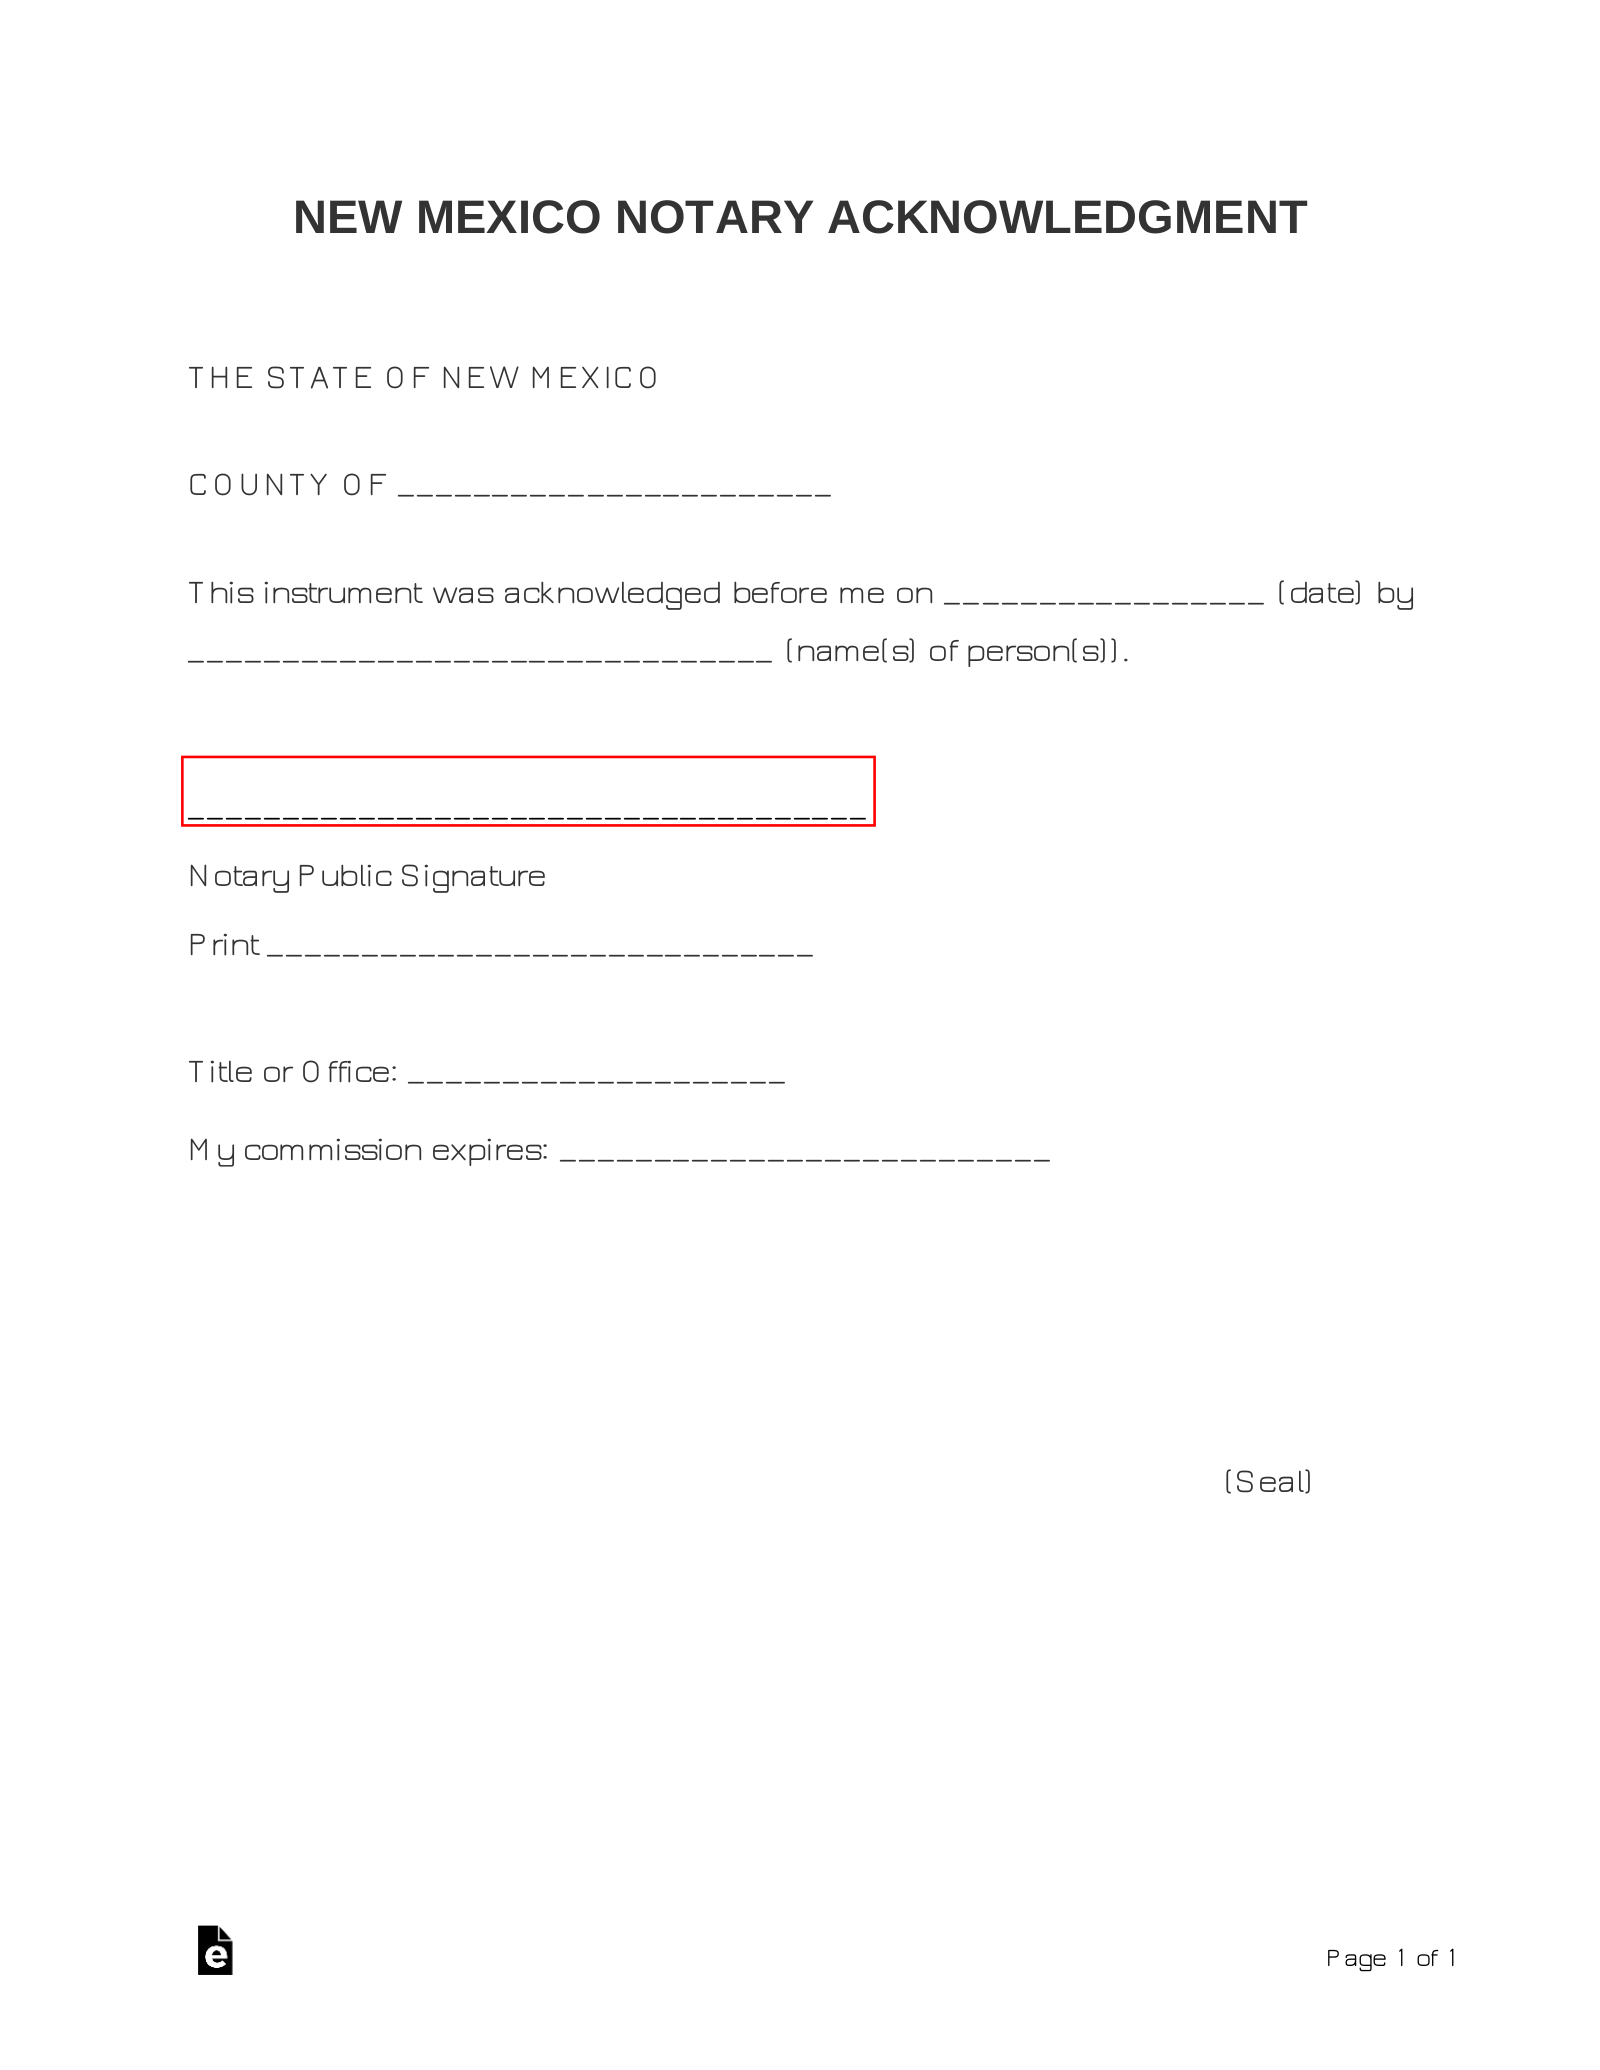 New Mexico Notary Acknowledgment Form